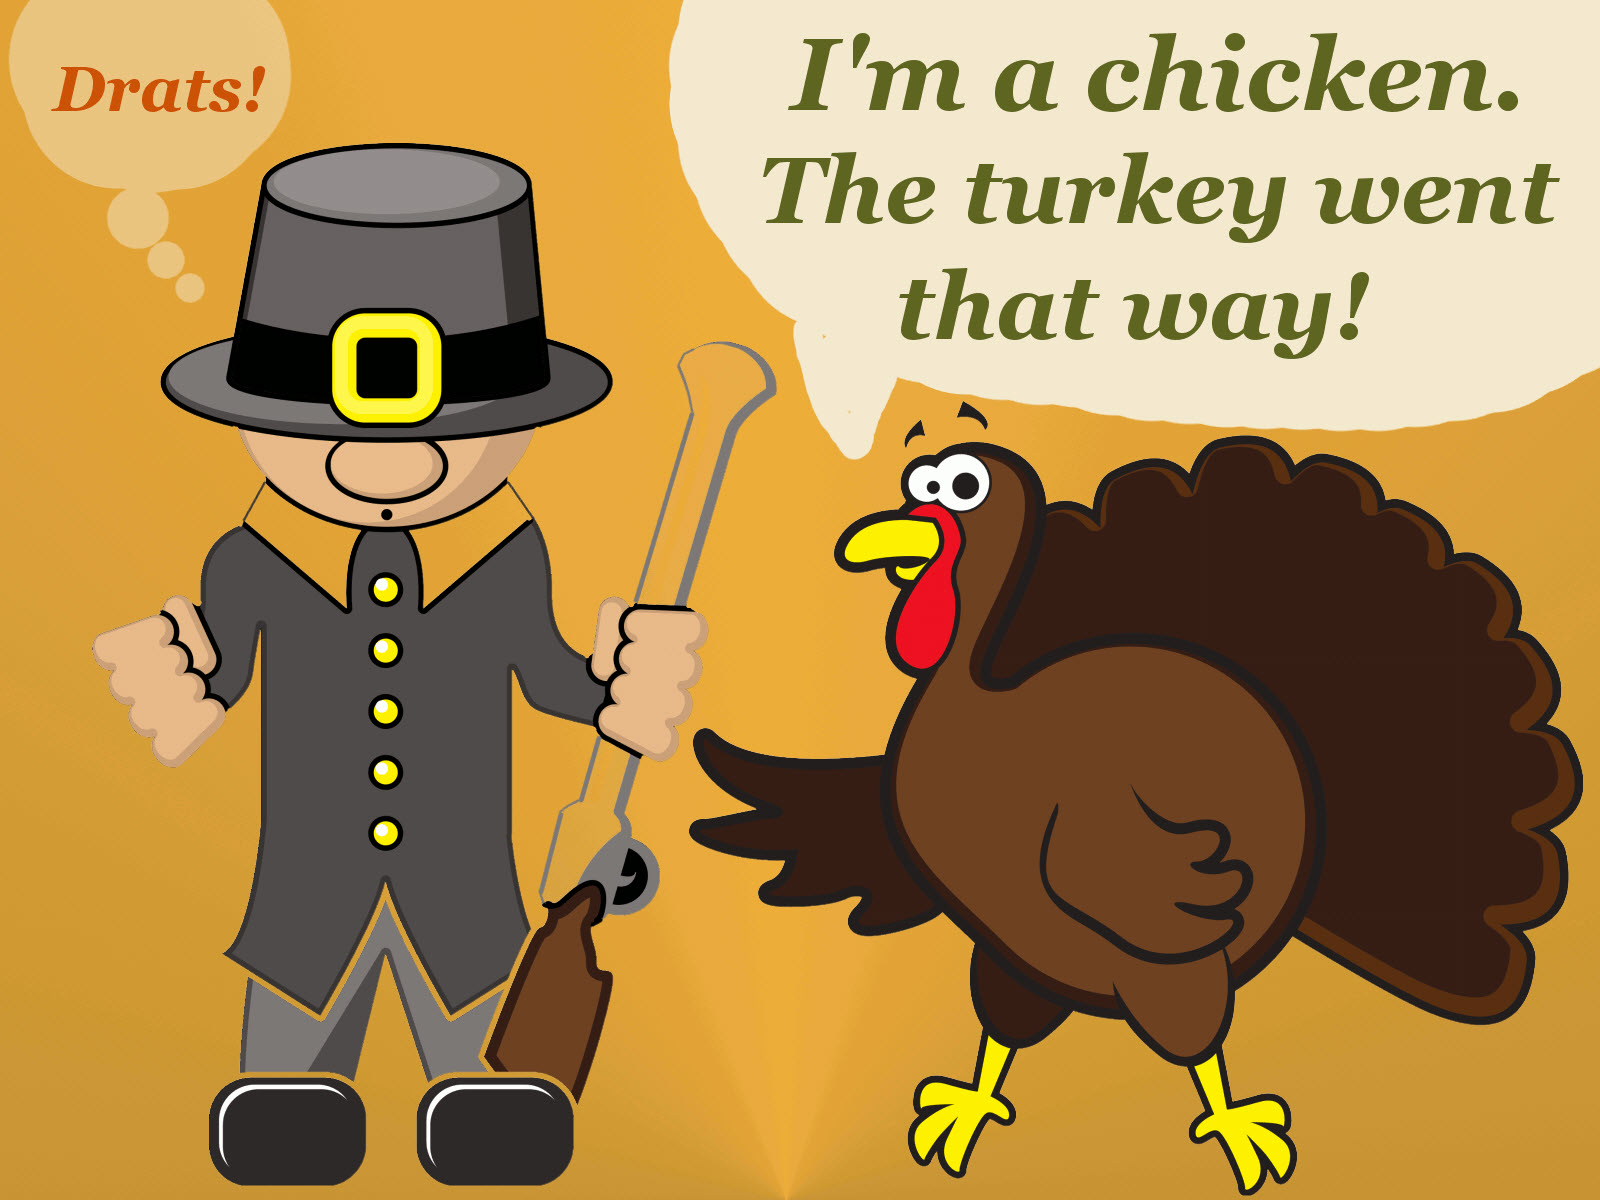 The Best Thanksgiving Wallpaper For Mobile Mac And Pc